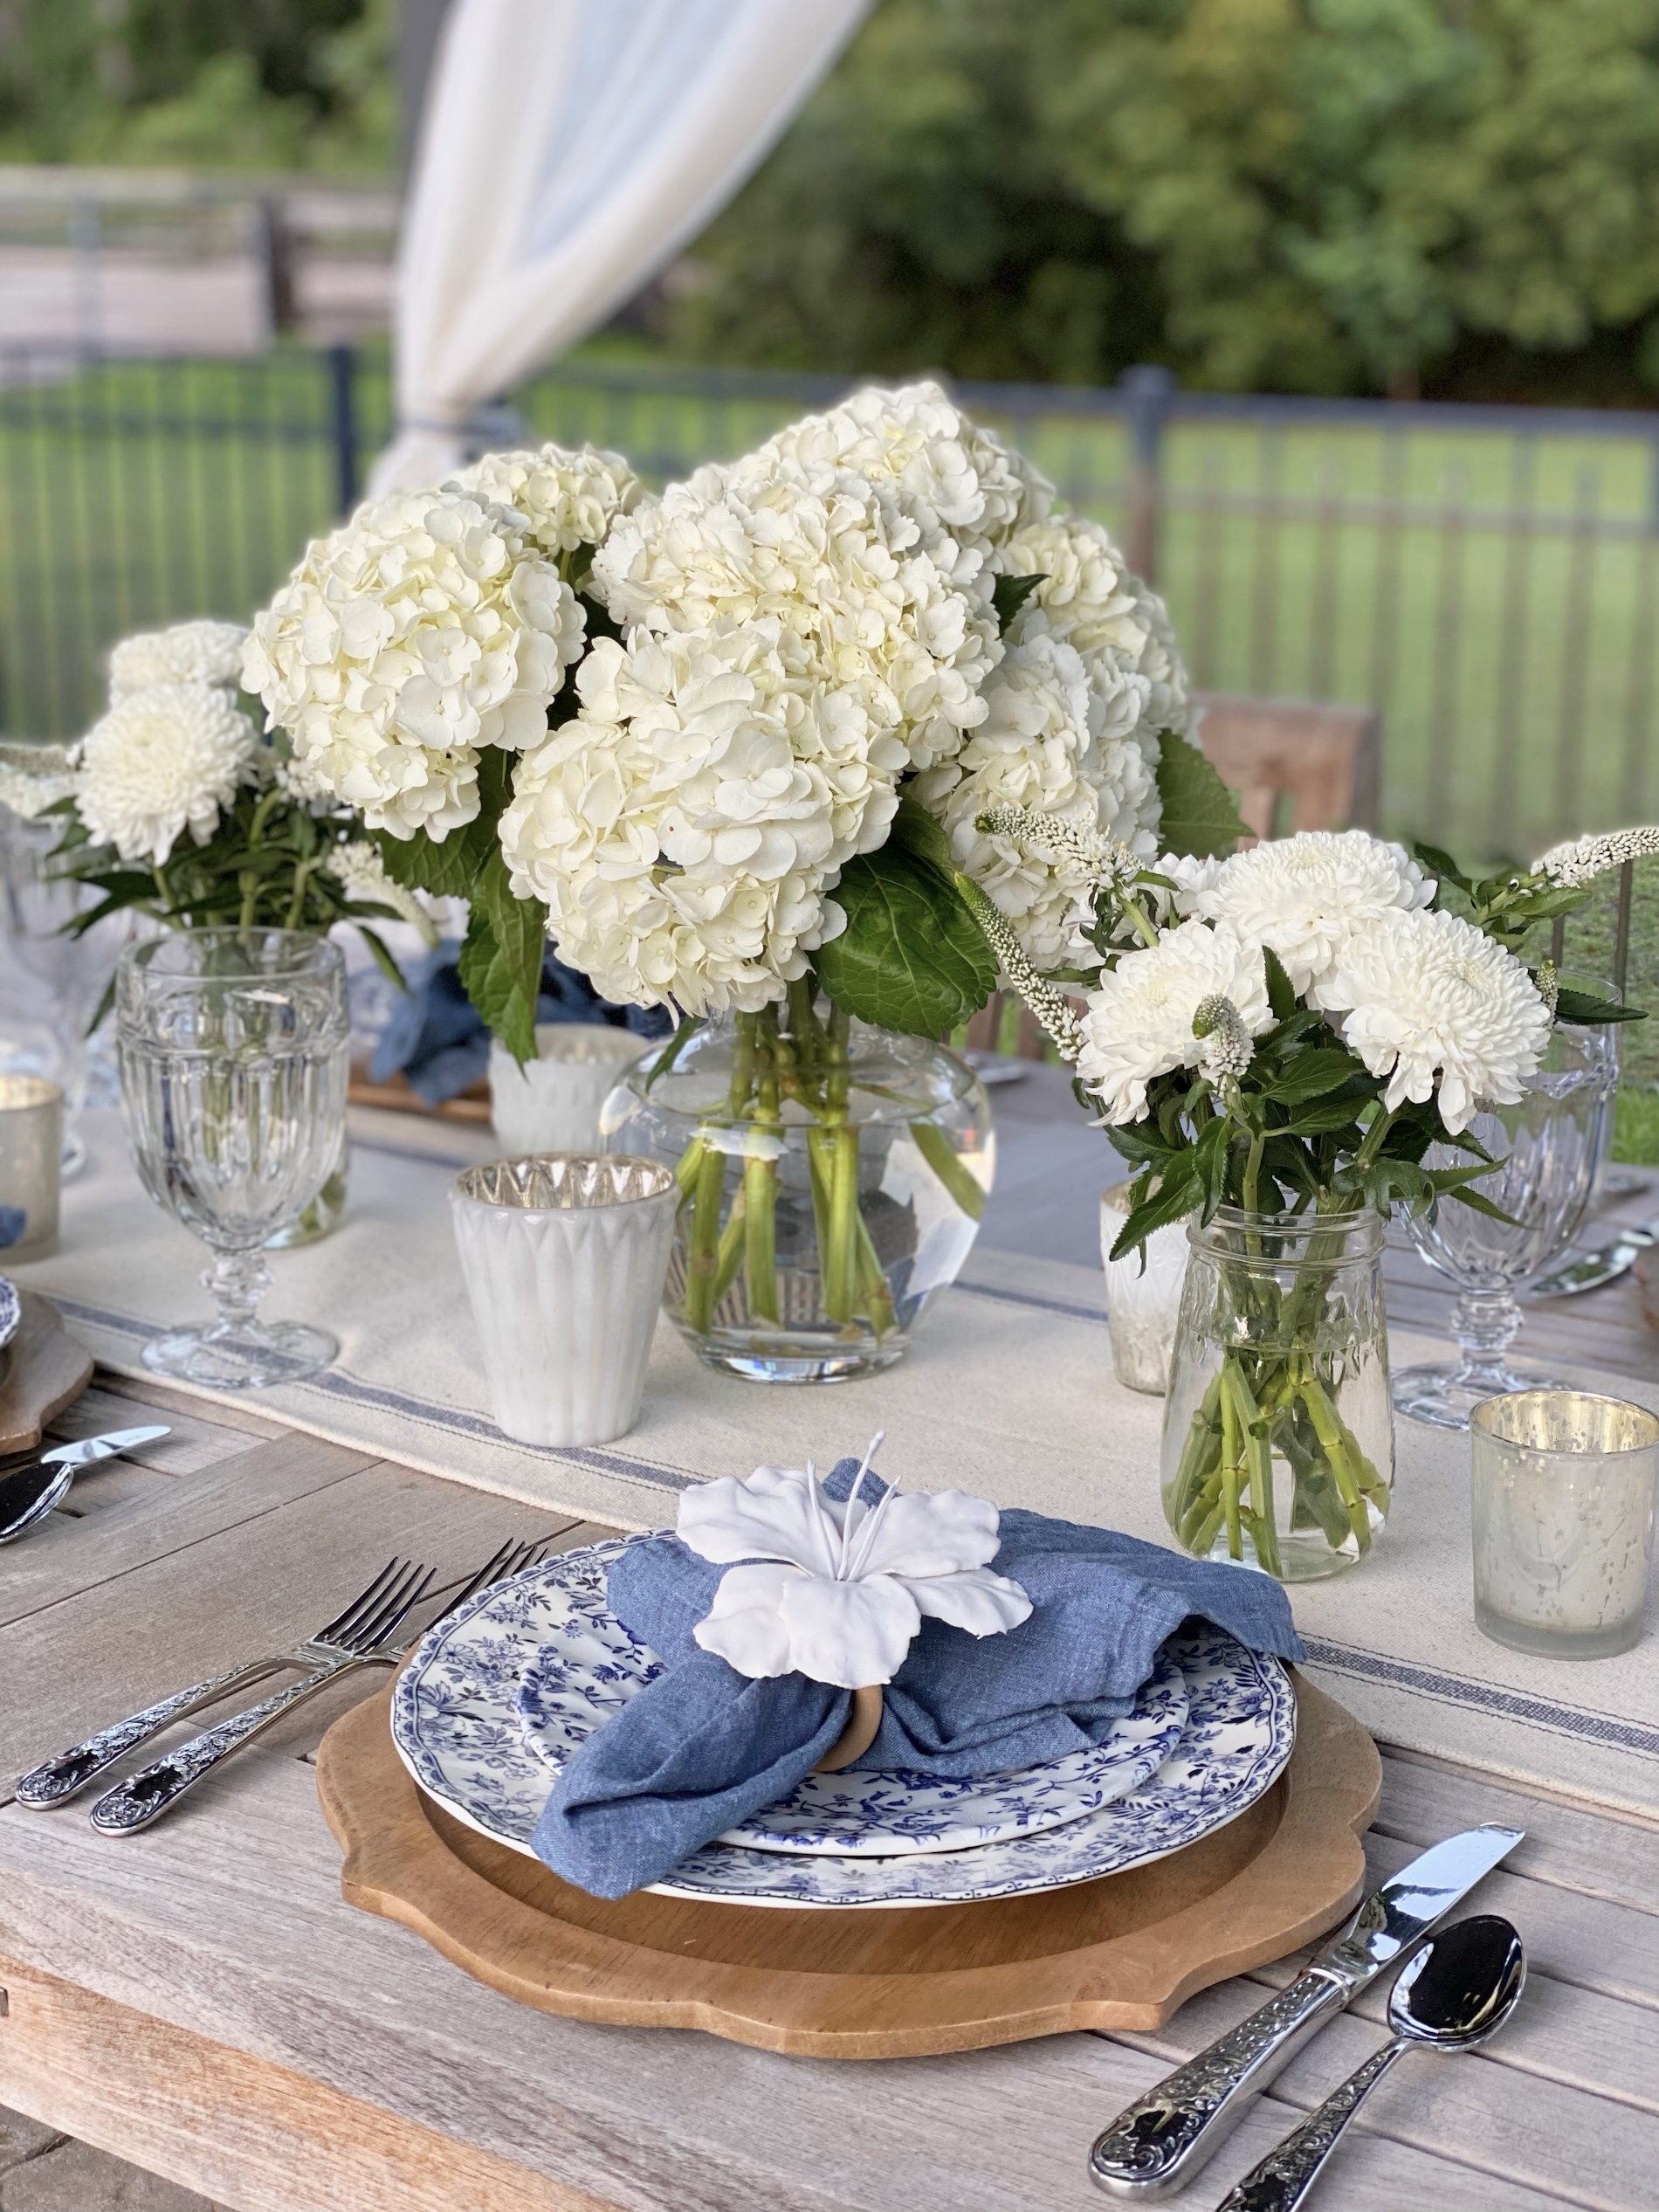 Blue and white tablescape with white floral arrangement centerpieces.